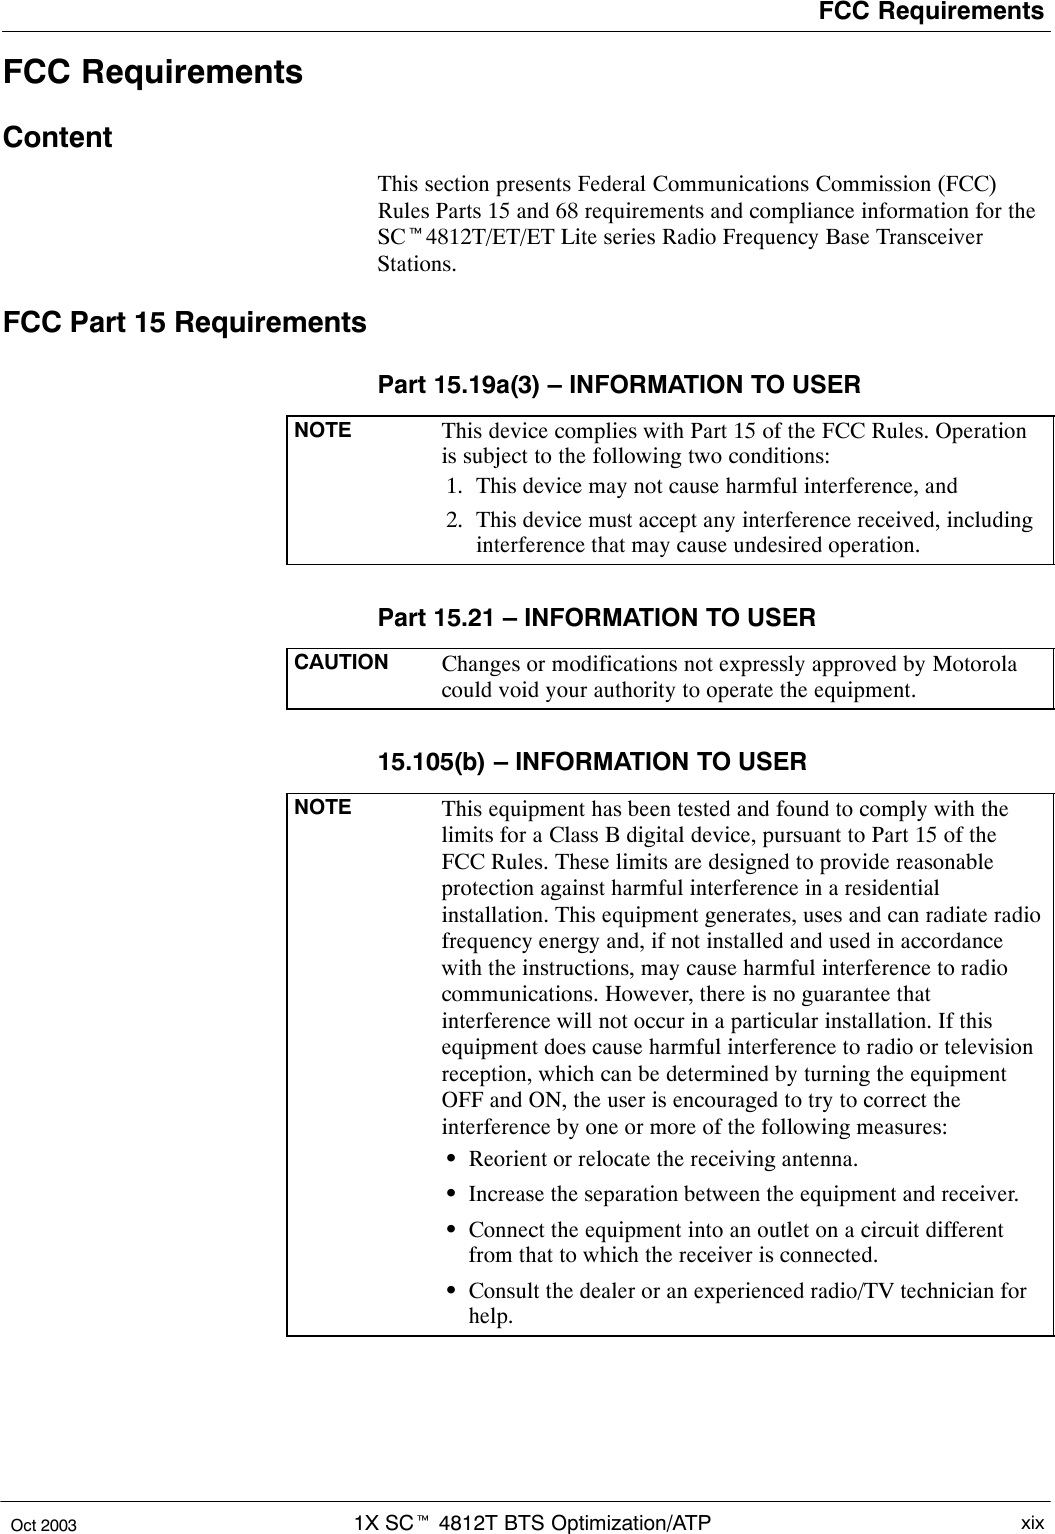 FCC Requirements1X SCt 4812T BTS Optimization/ATP xixOct 2003FCC RequirementsContentThis section presents Federal Communications Commission (FCC)Rules Parts 15 and 68 requirements and compliance information for theSCt4812T/ET/ET Lite series Radio Frequency Base TransceiverStations.FCC Part 15 RequirementsPart 15.19a(3) – INFORMATION TO USERNOTE This device complies with Part 15 of the FCC Rules. Operationis subject to the following two conditions:1. This device may not cause harmful interference, and2. This device must accept any interference received, includinginterference that may cause undesired operation.Part 15.21 – INFORMATION TO USERCAUTION Changes or modifications not expressly approved by Motorolacould void your authority to operate the equipment.15.105(b) – INFORMATION TO USERNOTE This equipment has been tested and found to comply with thelimits for a Class B digital device, pursuant to Part 15 of theFCC Rules. These limits are designed to provide reasonableprotection against harmful interference in a residentialinstallation. This equipment generates, uses and can radiate radiofrequency energy and, if not installed and used in accordancewith the instructions, may cause harmful interference to radiocommunications. However, there is no guarantee thatinterference will not occur in a particular installation. If thisequipment does cause harmful interference to radio or televisionreception, which can be determined by turning the equipmentOFF and ON, the user is encouraged to try to correct theinterference by one or more of the following measures:SReorient or relocate the receiving antenna.SIncrease the separation between the equipment and receiver.SConnect the equipment into an outlet on a circuit differentfrom that to which the receiver is connected.SConsult the dealer or an experienced radio/TV technician forhelp.